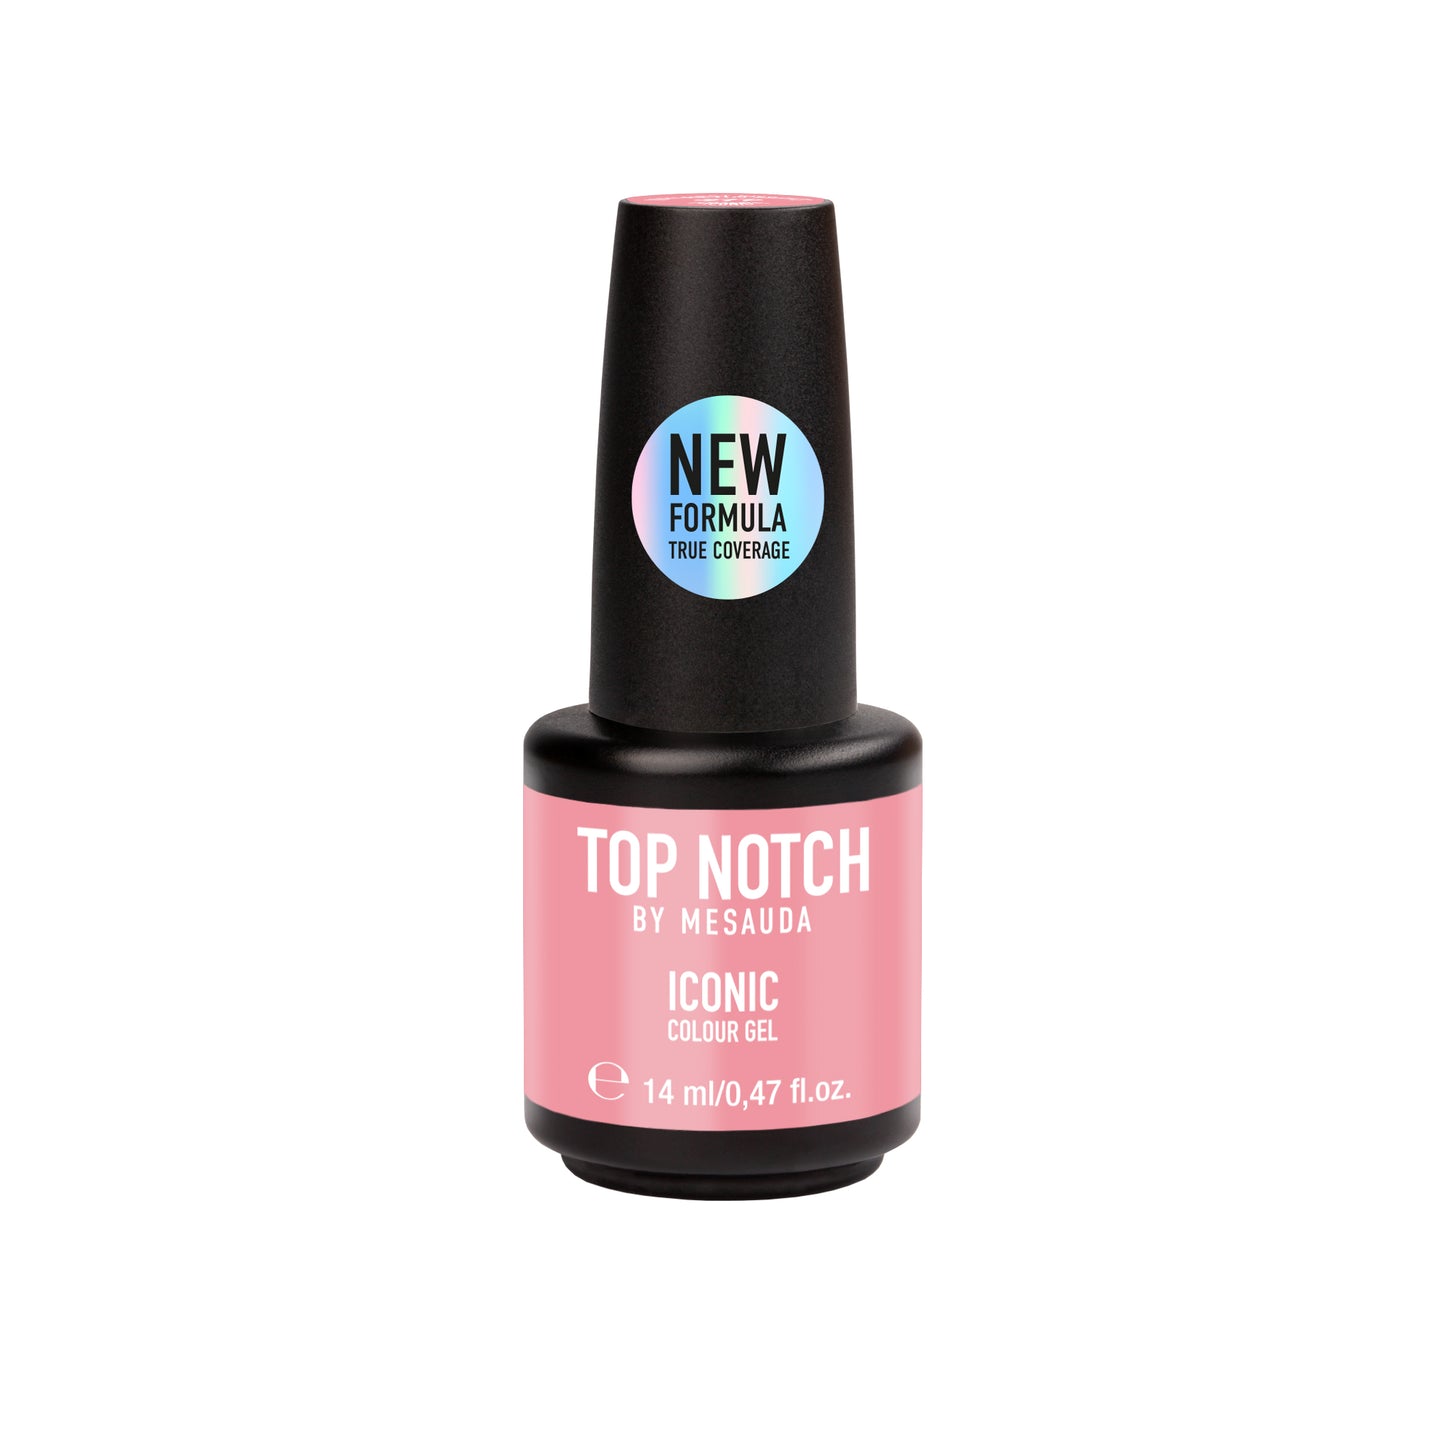 Mesauda - Top Notch Iconic - Modern Romance Collection - #277 First Kiss 14ml